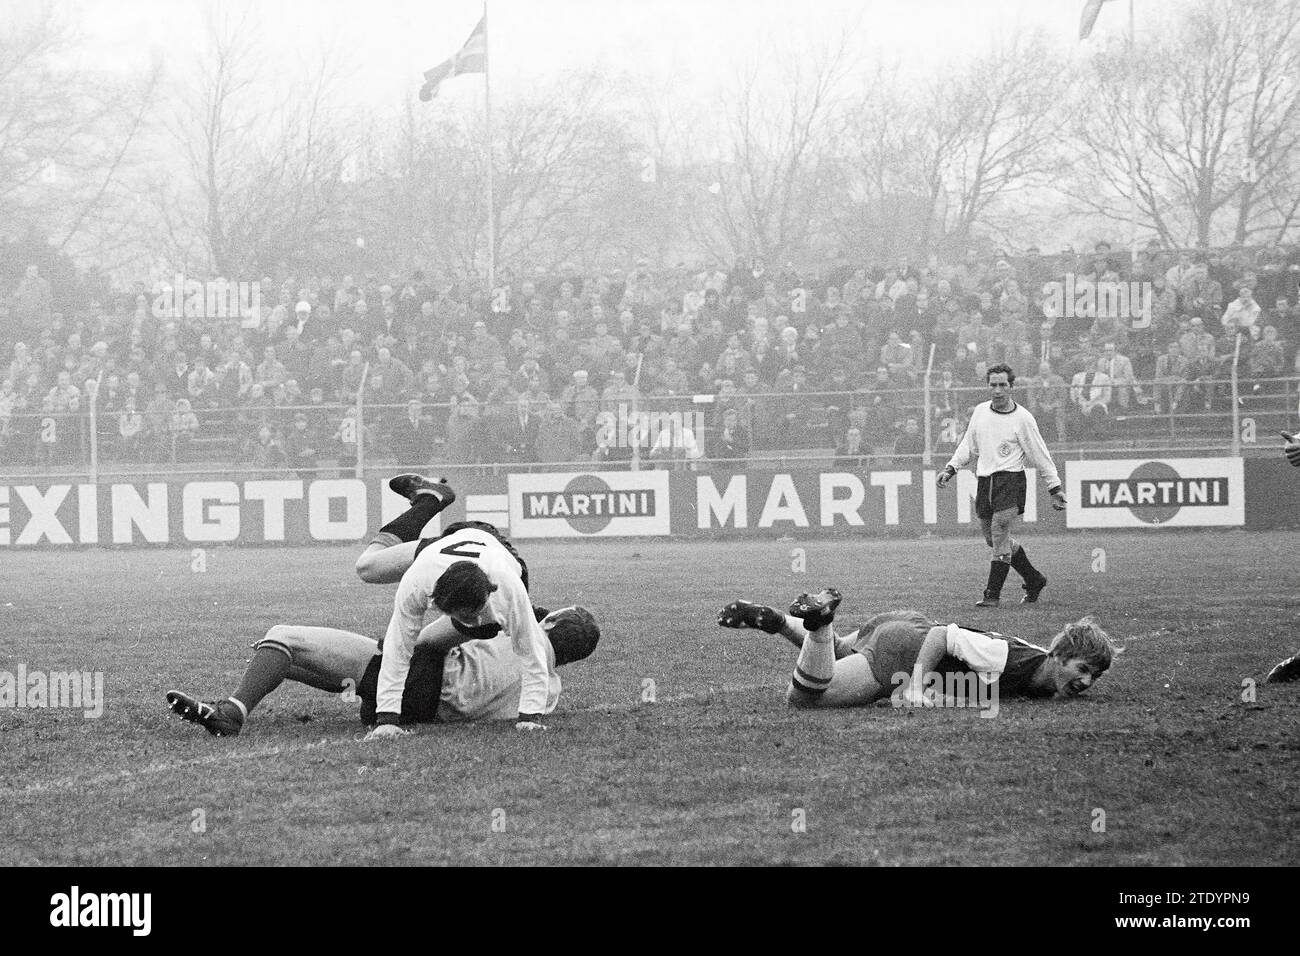 Haarlem - NAC, Football Haarlem, 22-11-1970, Whizgle News from the Past, Tailored for the Future. Explore historical narratives, Dutch The Netherlands agency image with a modern perspective, bridging the gap between yesterday's events and tomorrow's insights. A timeless journey shaping the stories that shape our future. Stock Photo